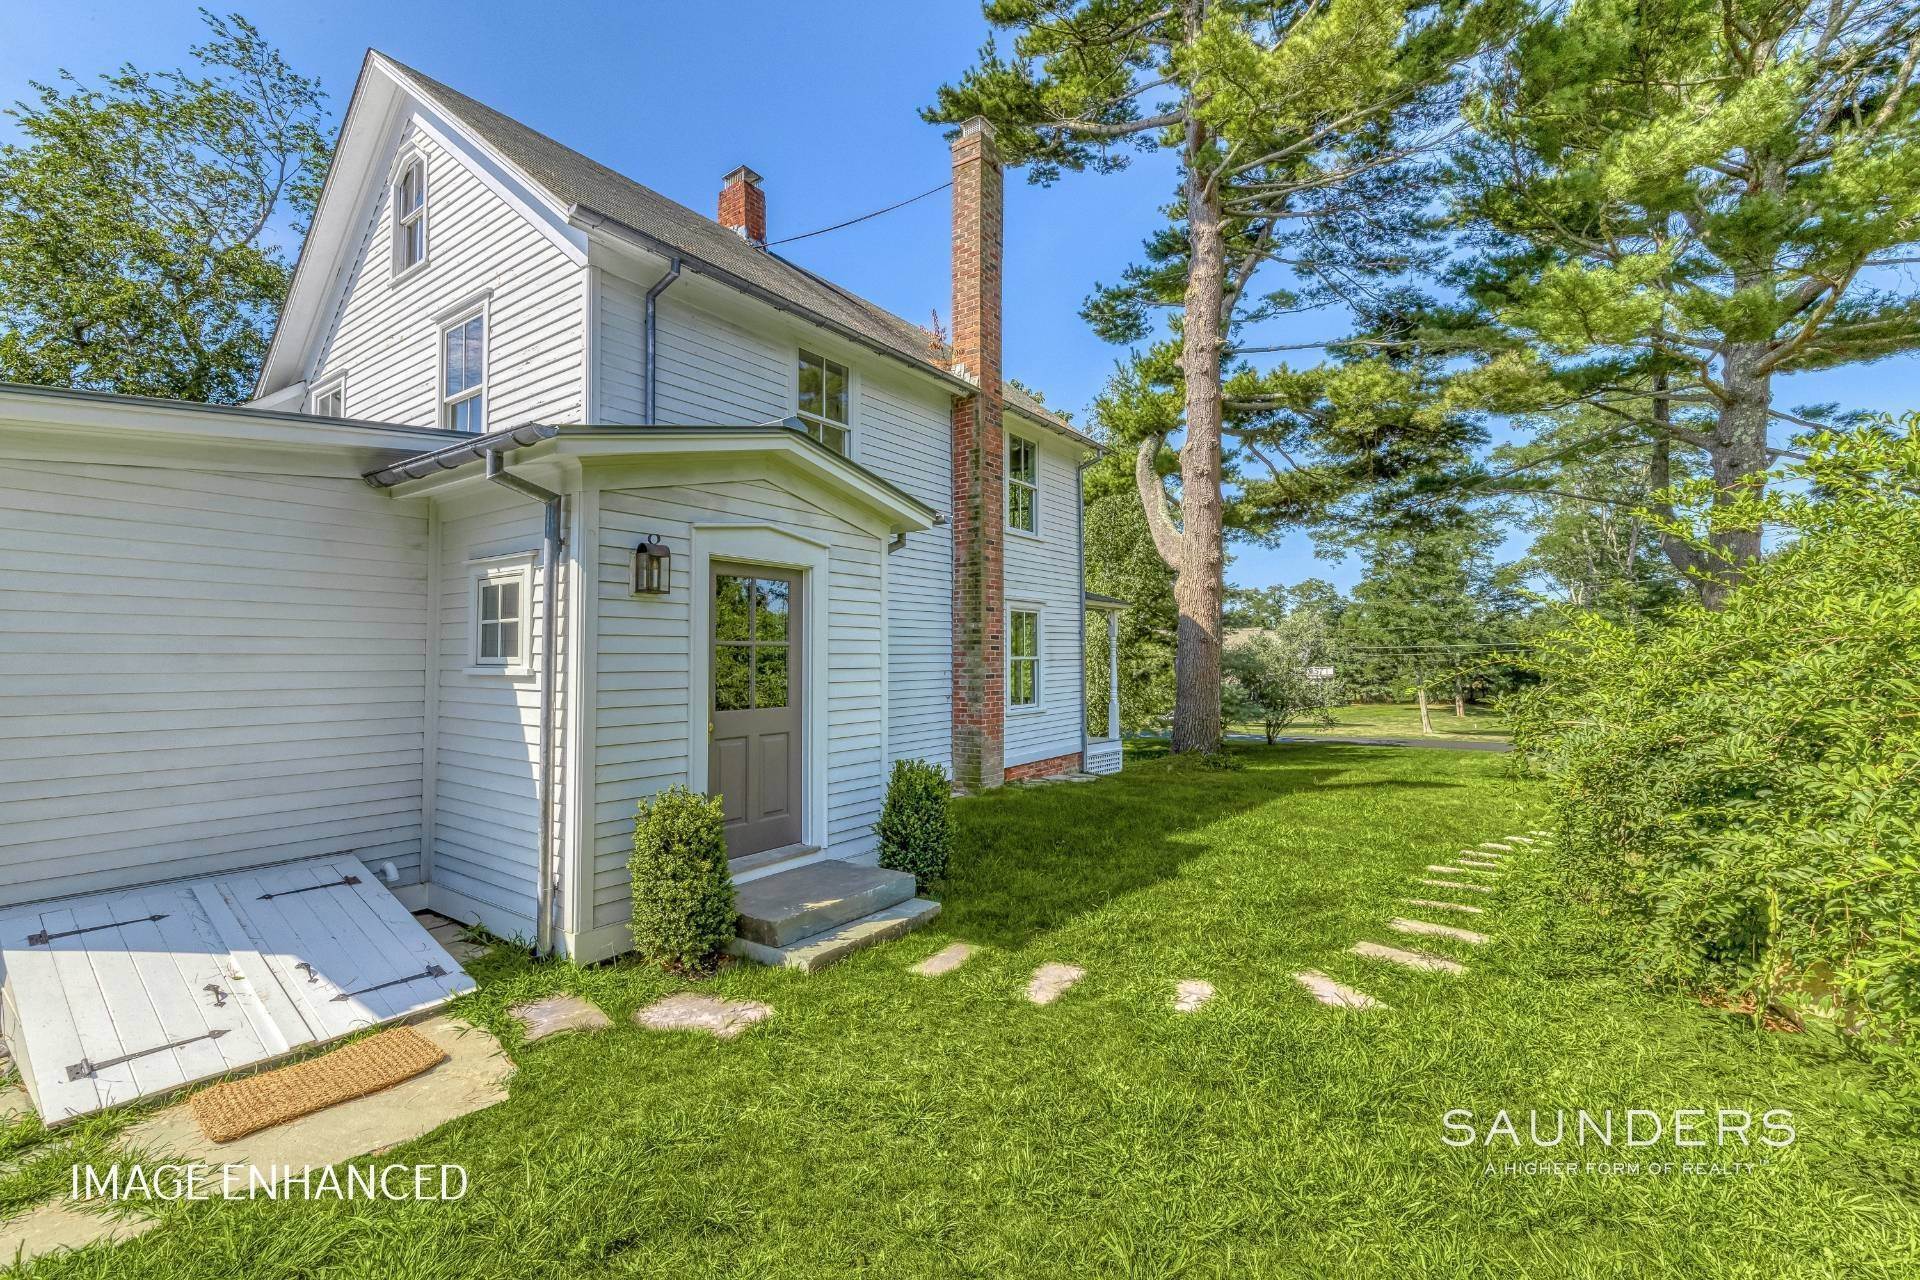 45. Single Family Homes for Sale at Shelter Island Restored 1900 Farmhouse With Barn 9 Sunshine Road, Shelter Island, NY 11964